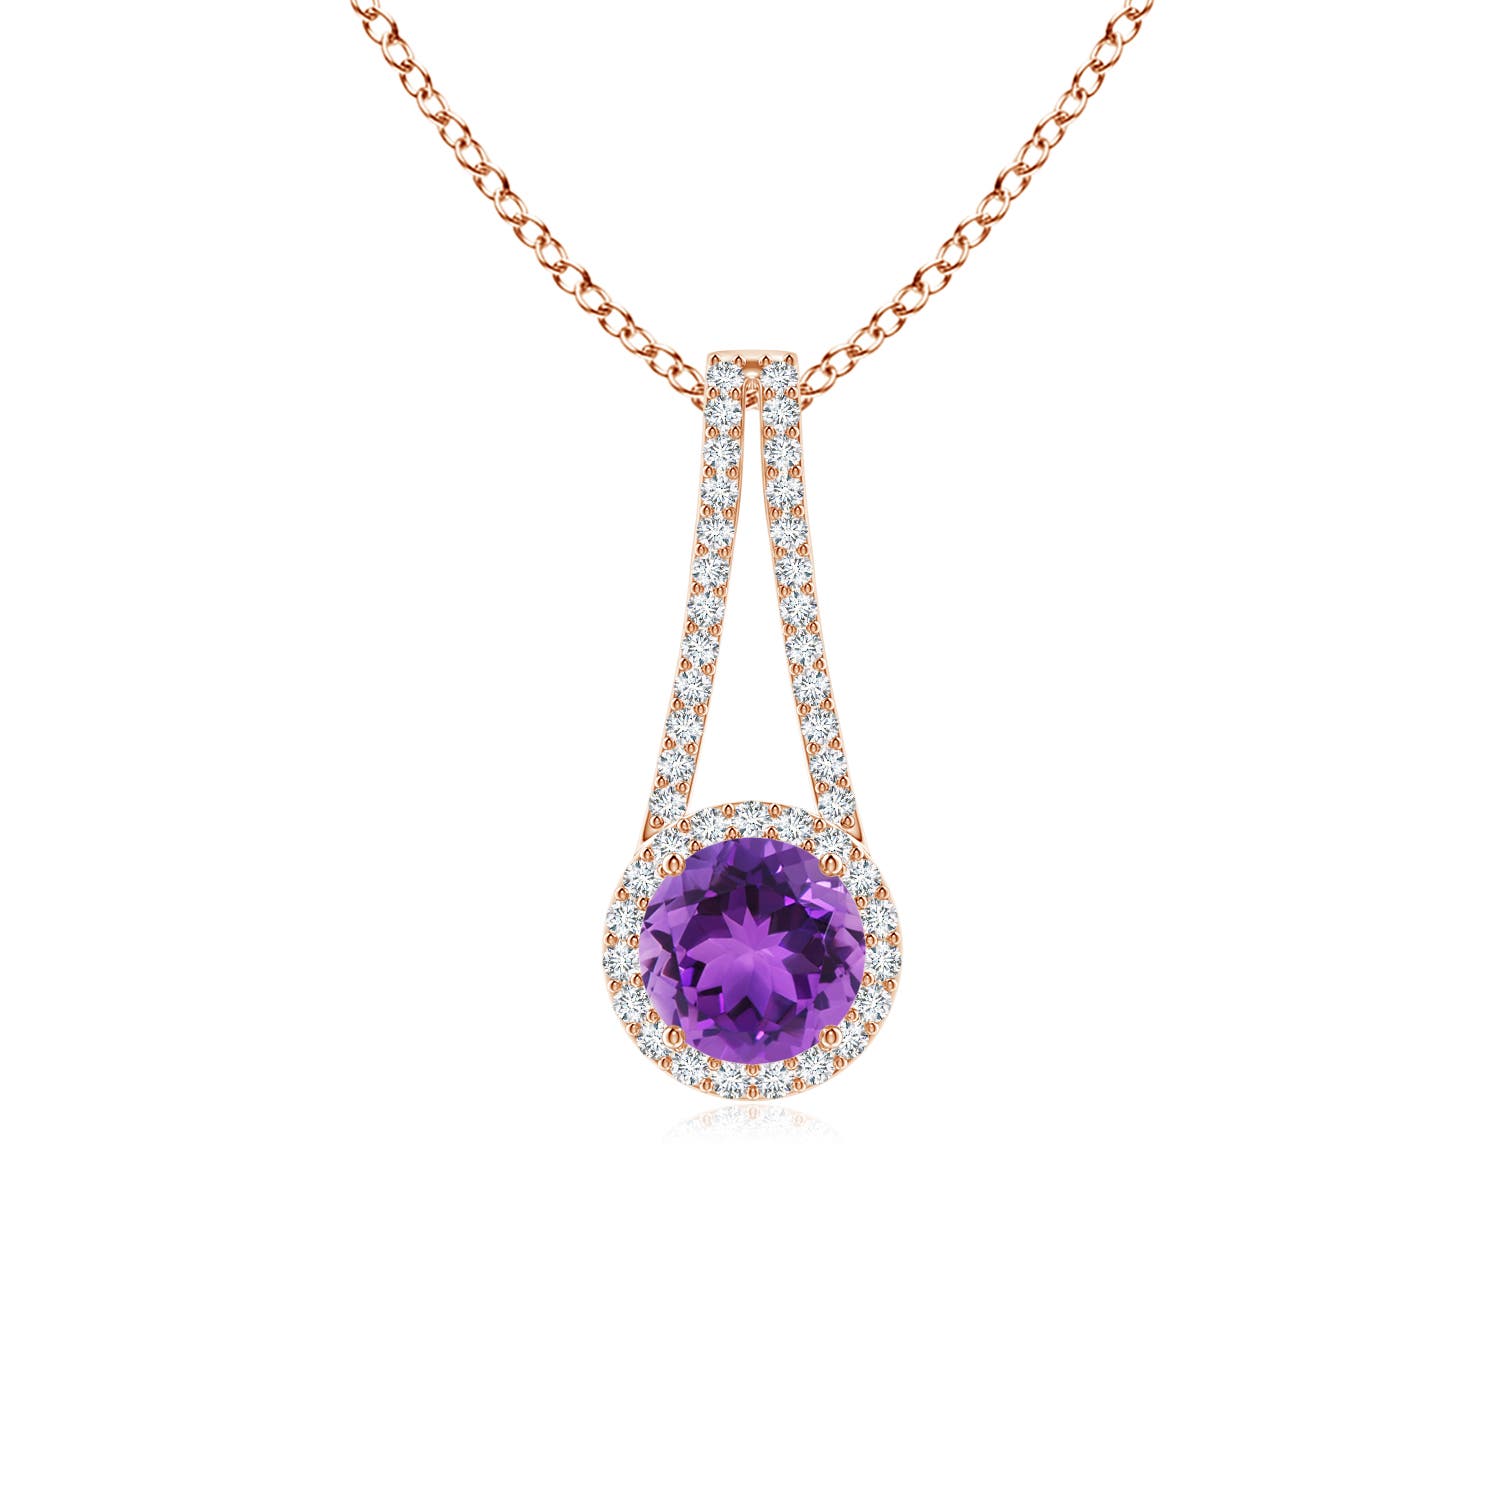 AAA - Amethyst / 1.02 CT / 14 KT Rose Gold